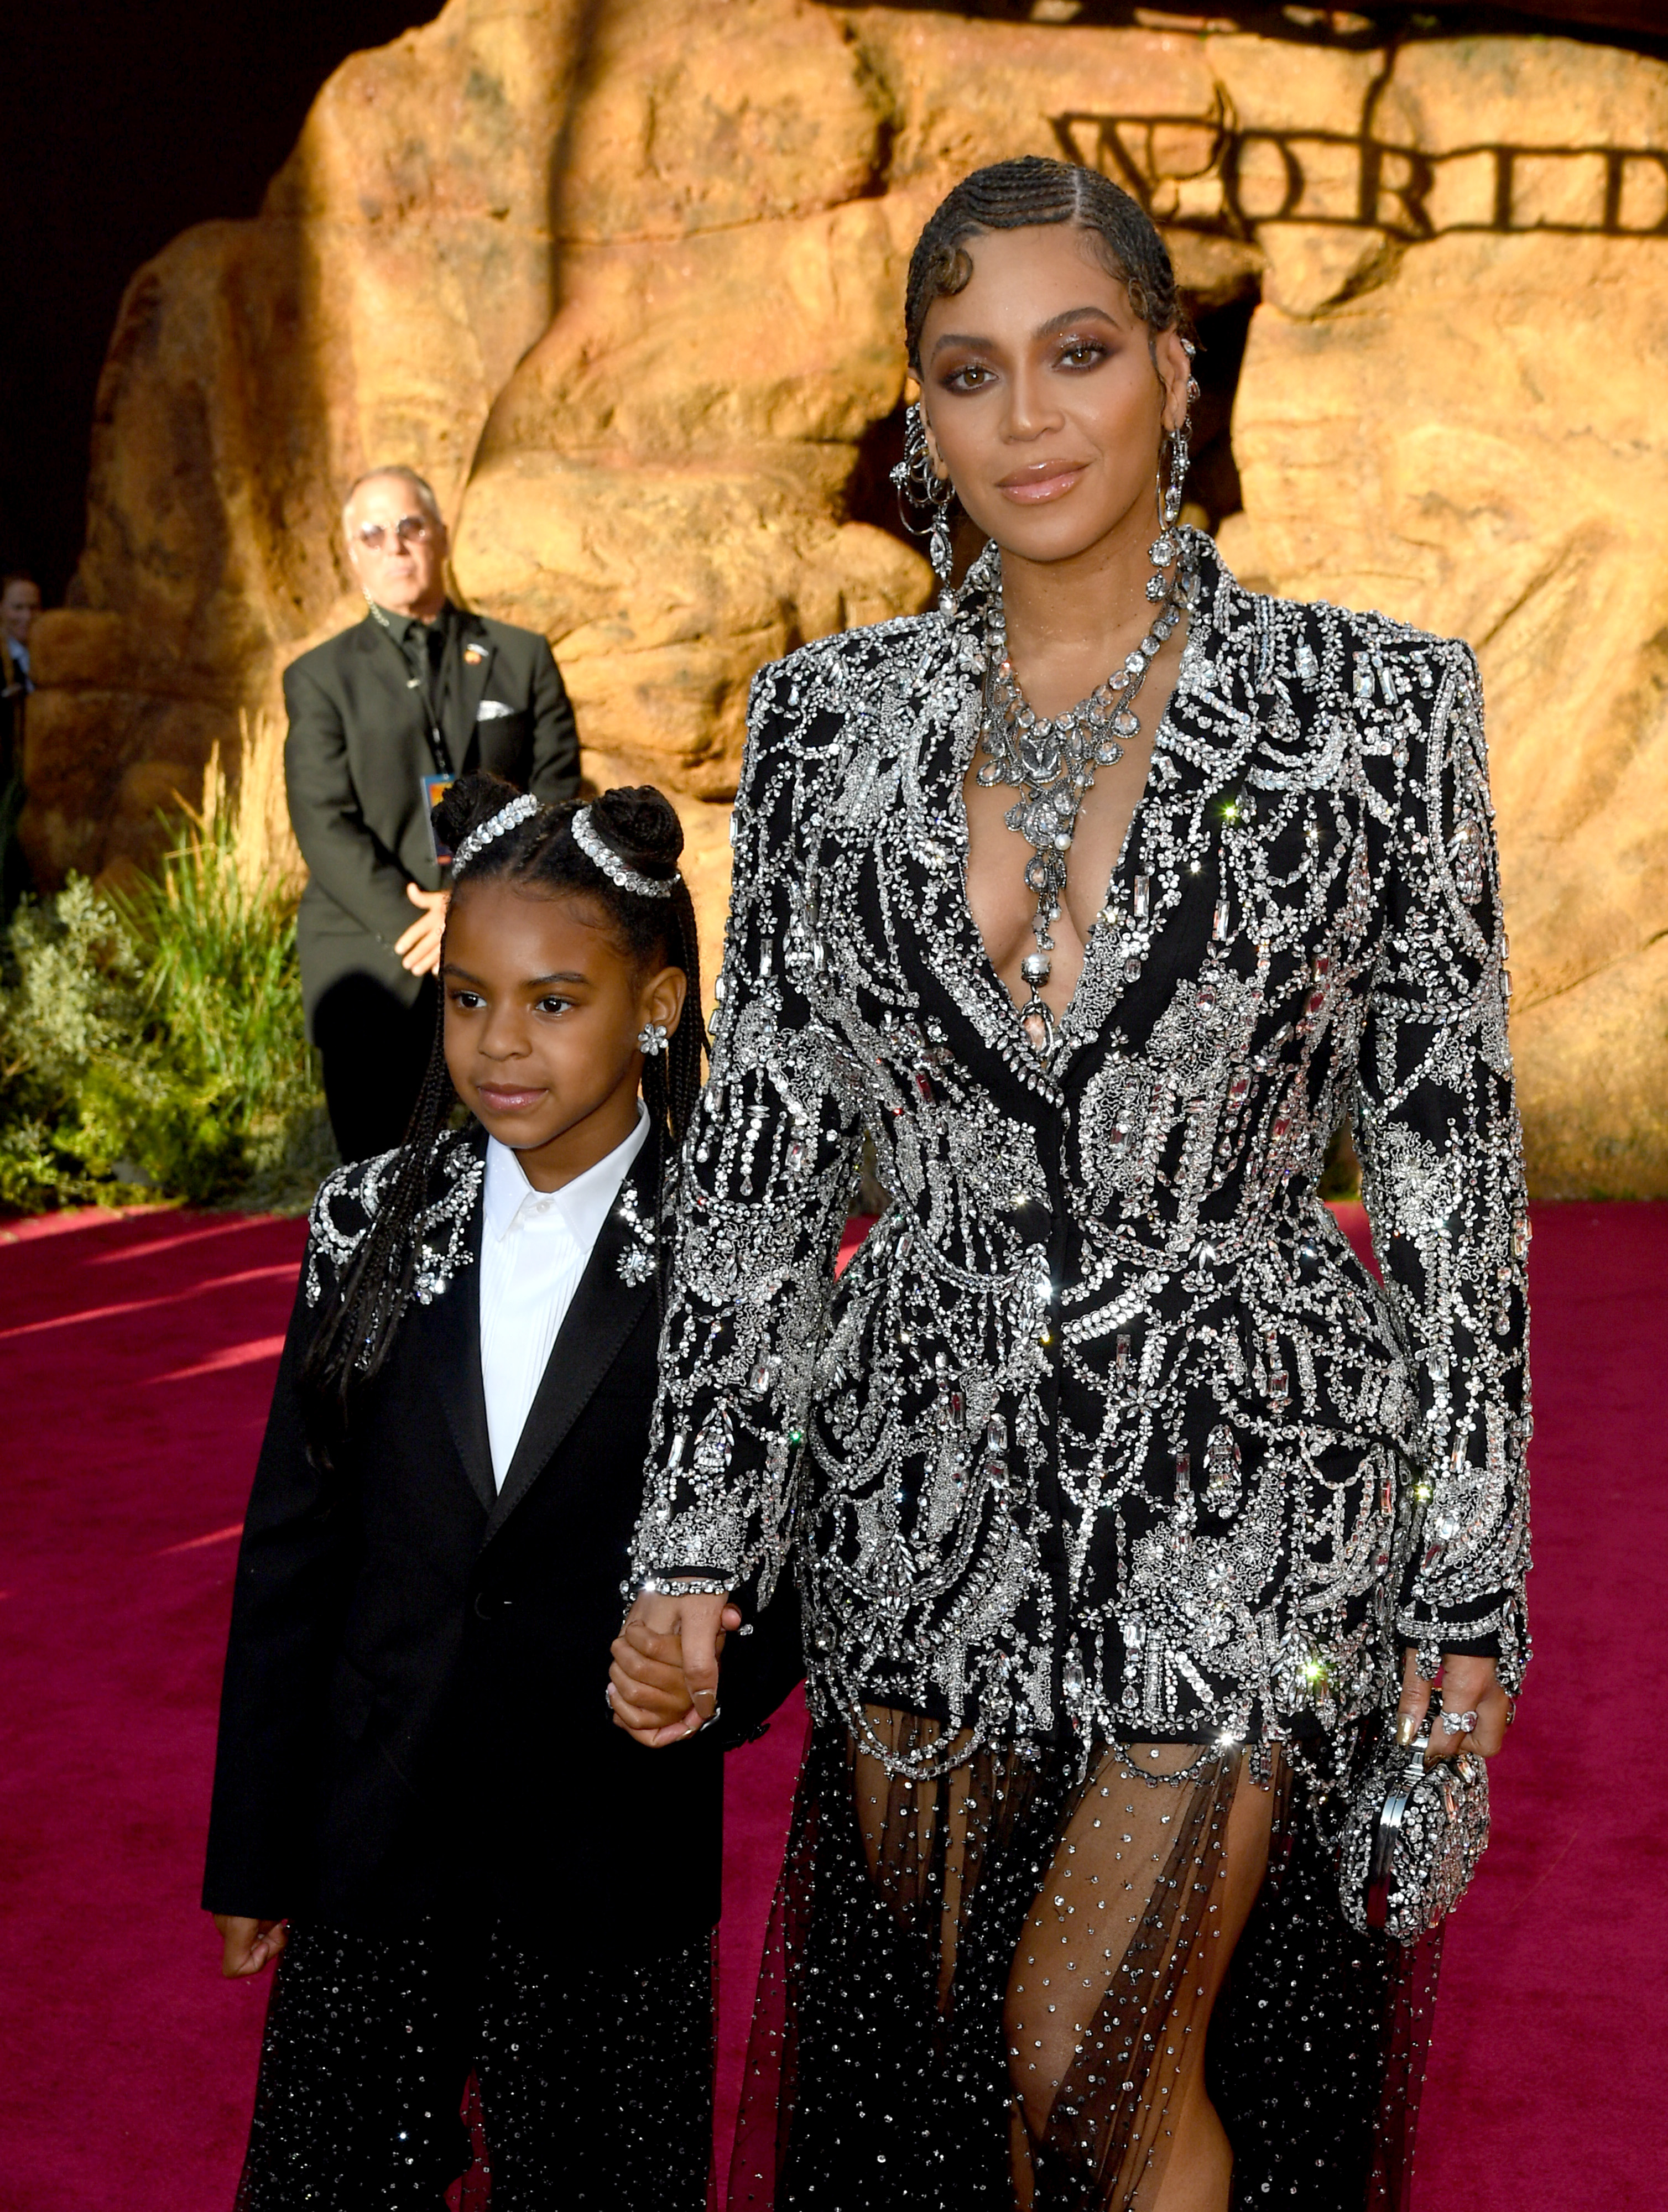 Blue Ivy Carter and Beyoncé attends the premiere of Disney's "The Lion King" at Dolby Theatre on July 9, 2019 in Hollywood, California. | Source: Getty Images